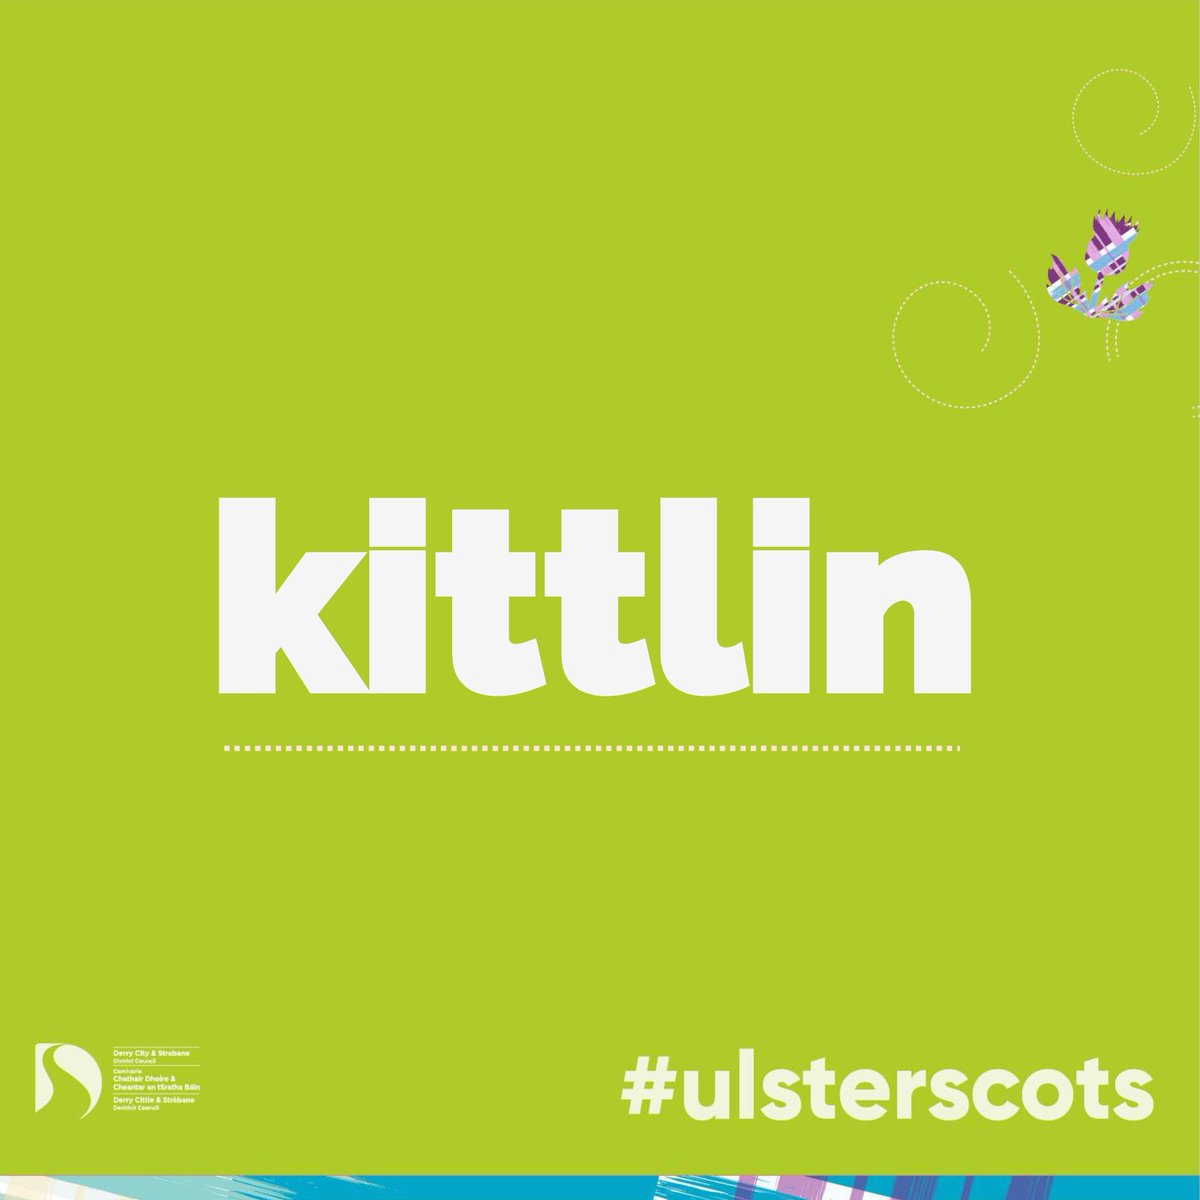 Kittlin (noun): a kitten. Often heard in the phrase 'Gleaming like a kittlin’s eye' meaning to sparkle. From Old Norse 'ketlingr', cognate with the Middle English 'kiteling', Icelandic 'kettlingur', Norwegian 'ketling' and Swedish 'källing' #UlsterScots #Scots #Germanic 🐱